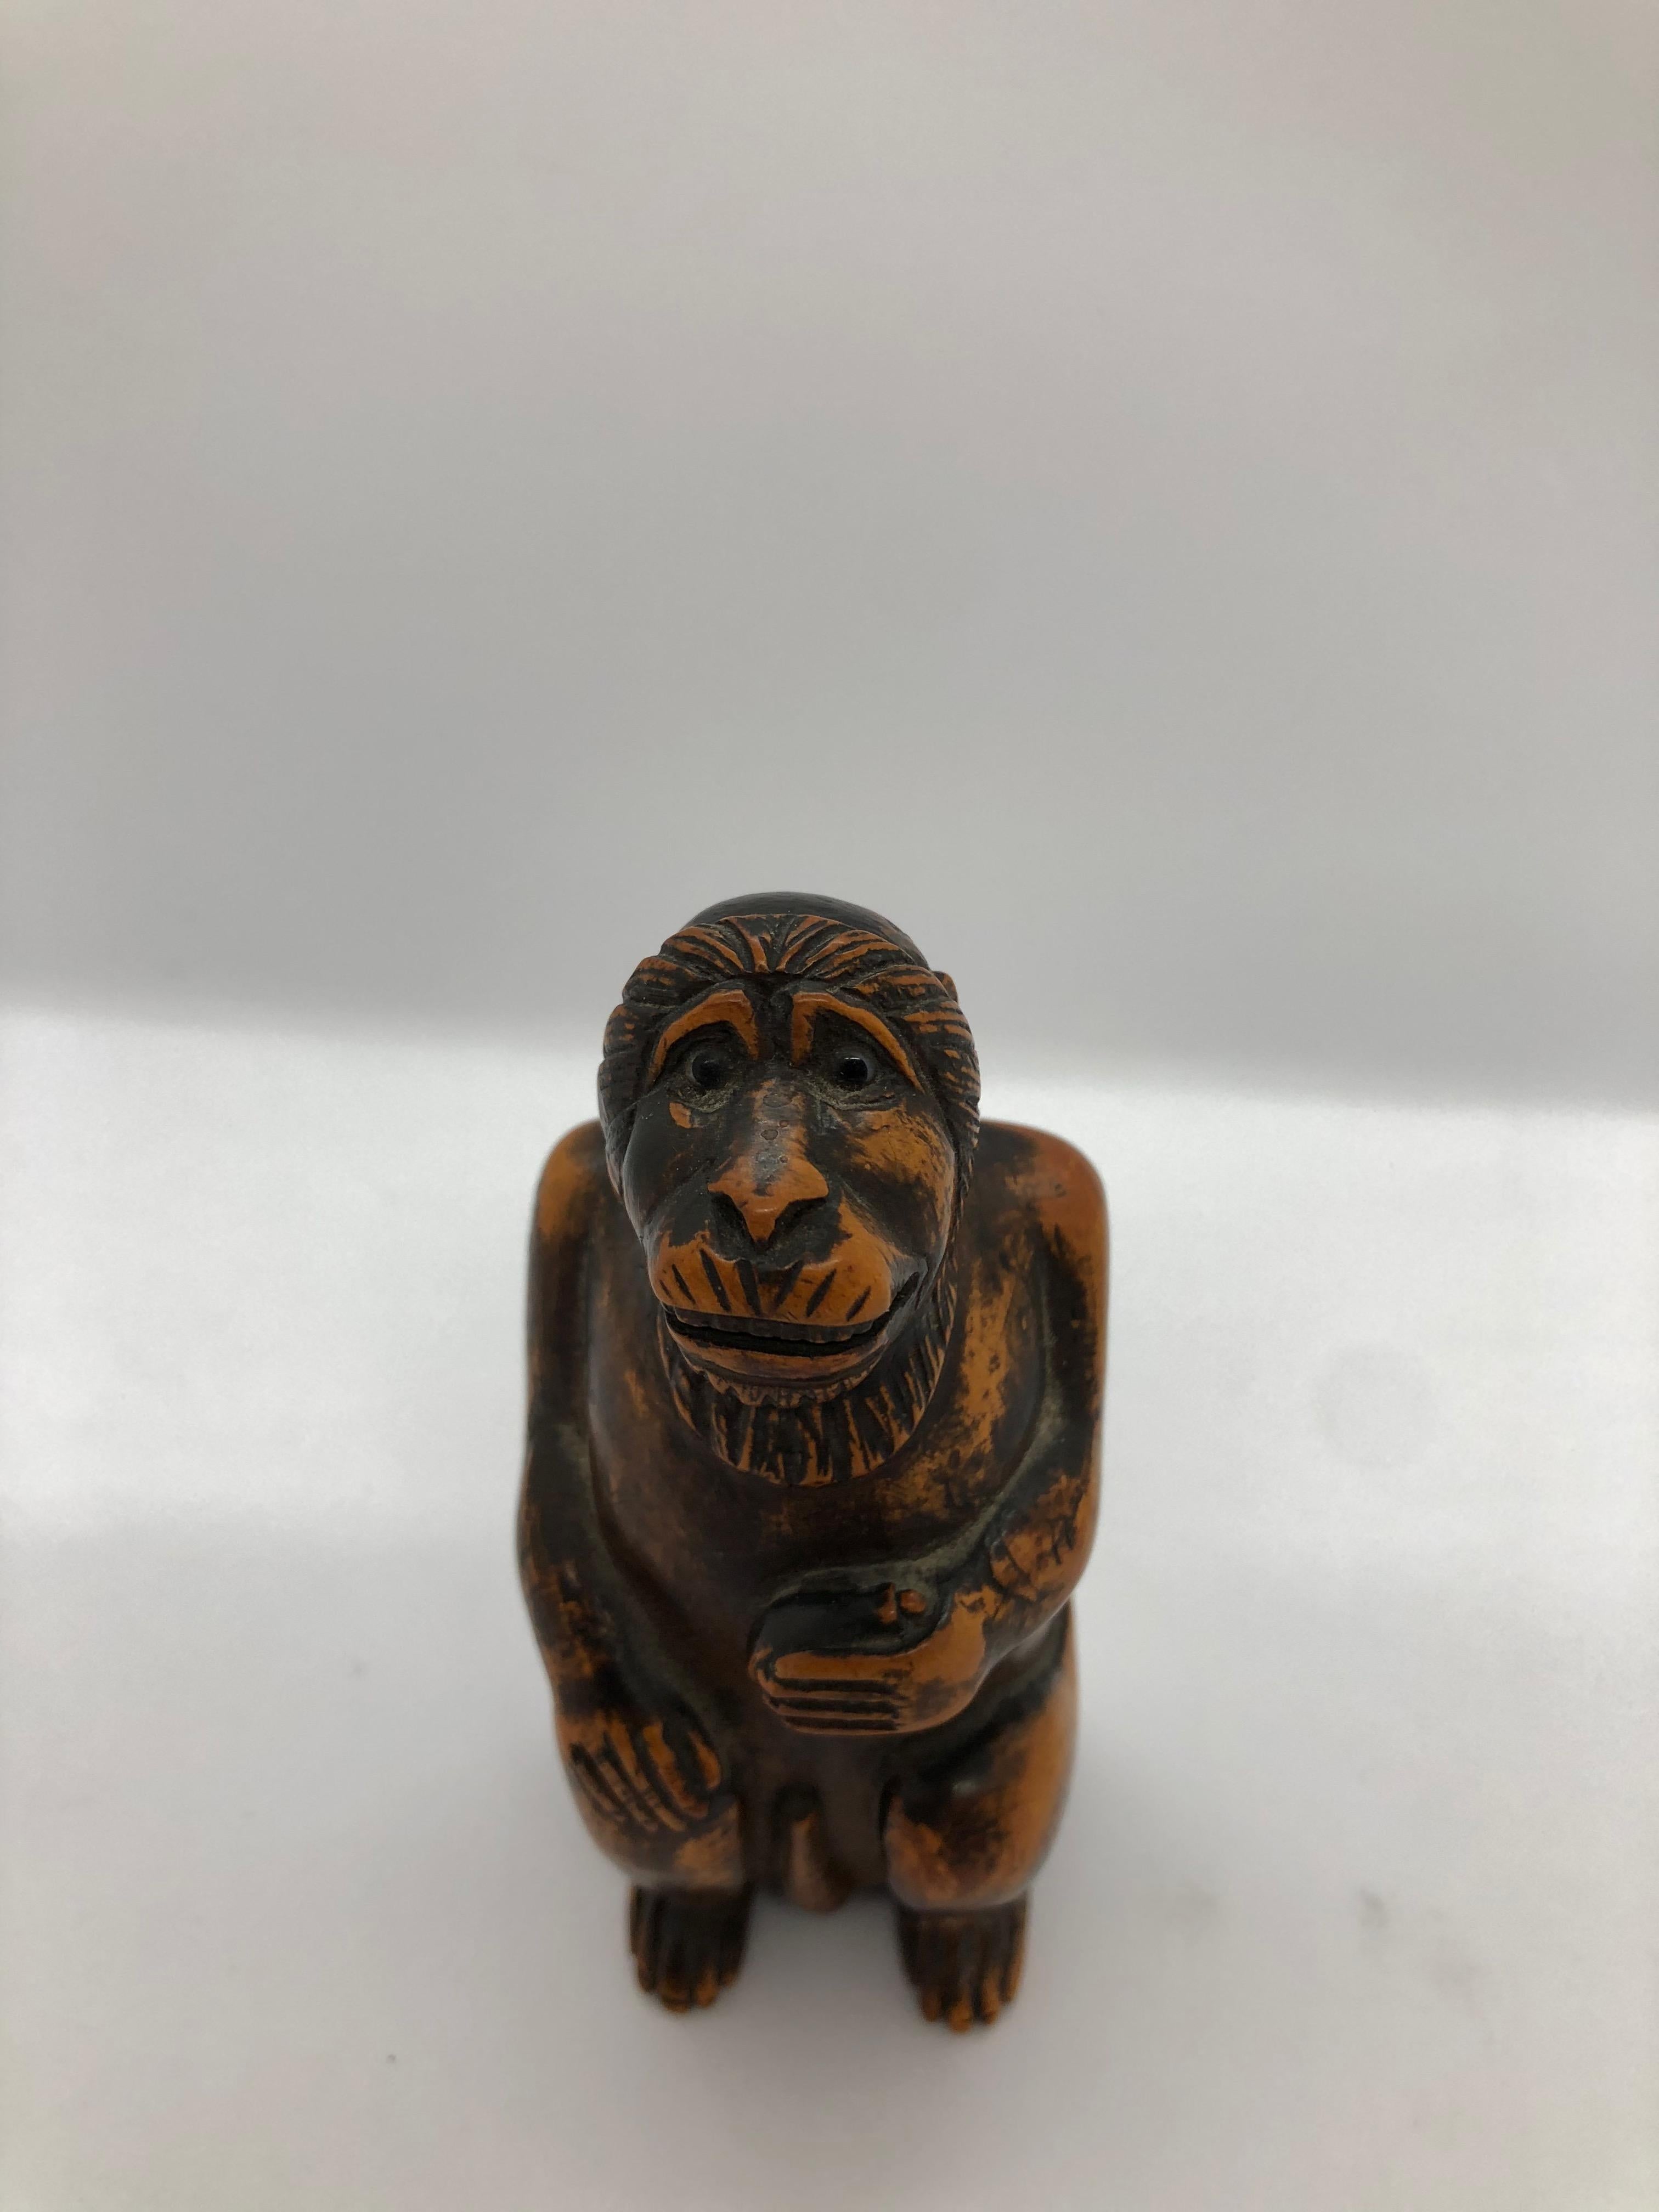 Hardwood Box in the Shape of a Monkey, 19th Century